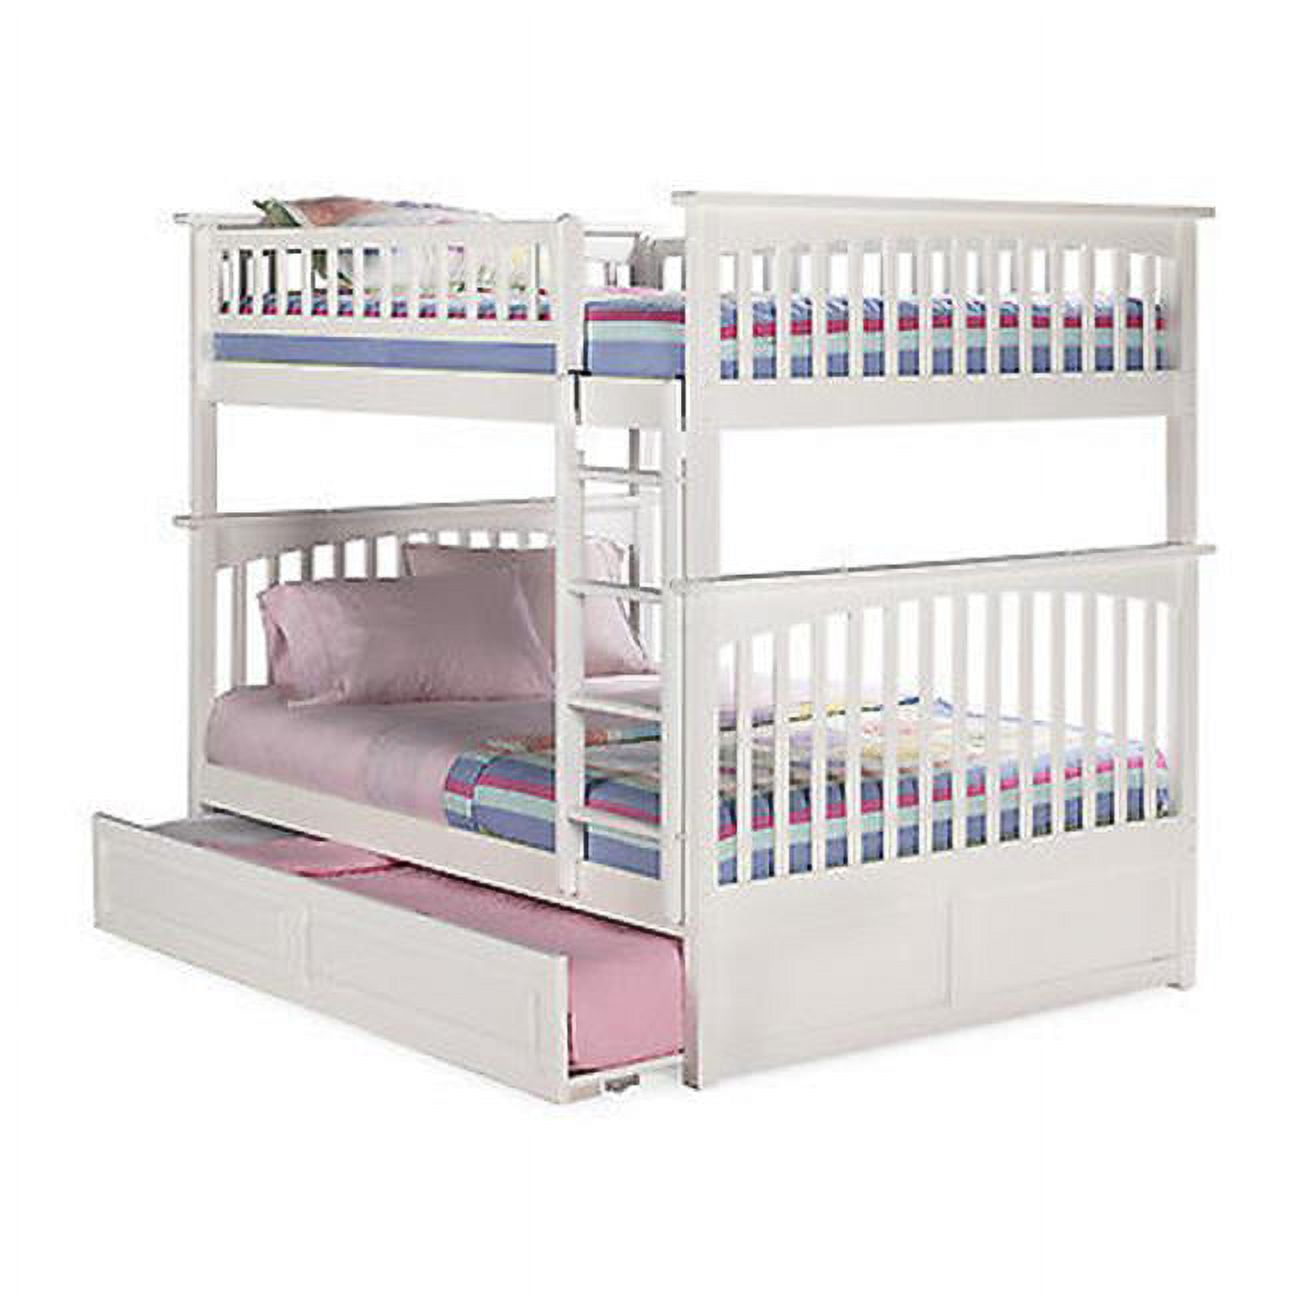 Ab55532 Columbia Bunkbed With Trundle Bed, Full Over Full Size - White